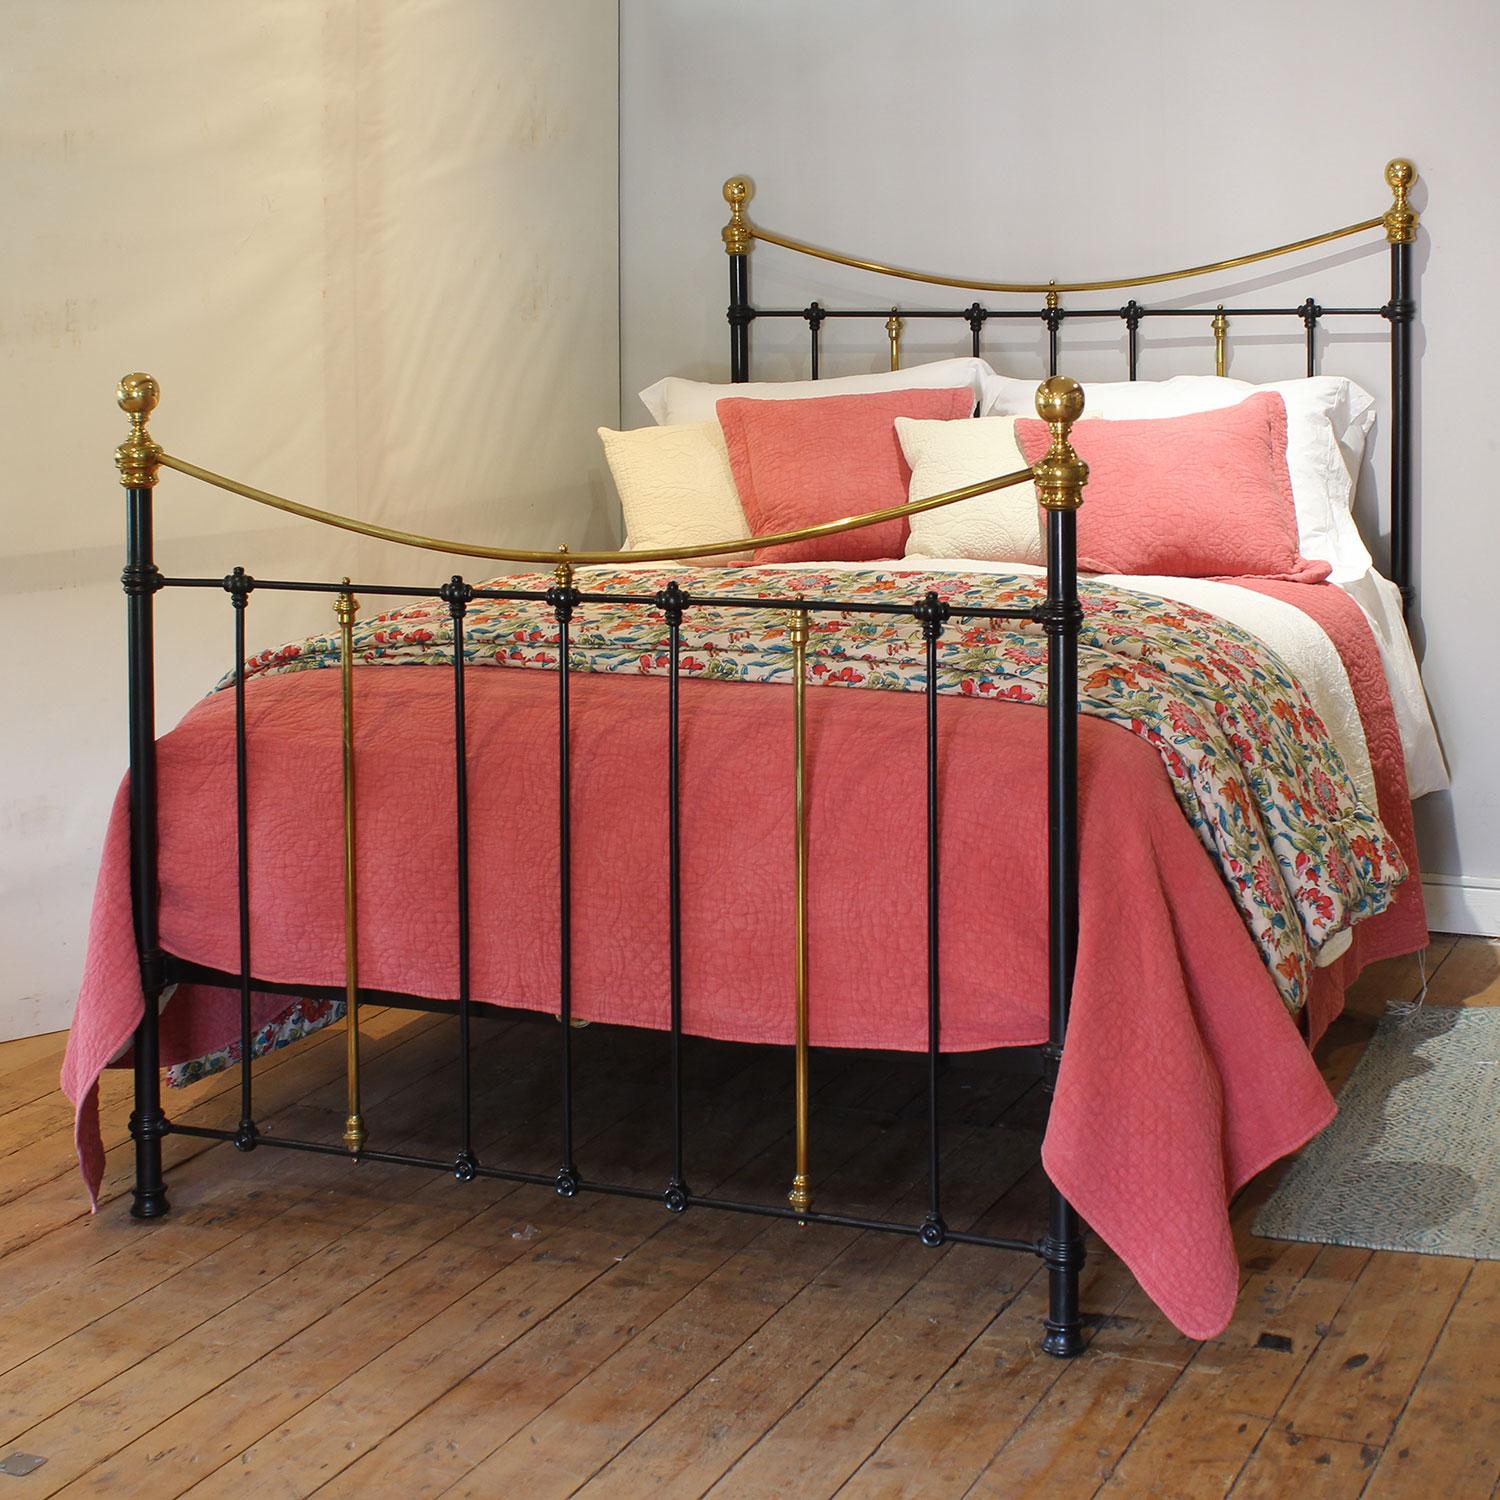 An attractive cast iron antique bed finished in black with curved brass top rails and simple castings.

This bed accepts a UK king size or US queen size (5ft, 60in or 150cm wide) base and mattress set.

The price includes a standard firm bed base to